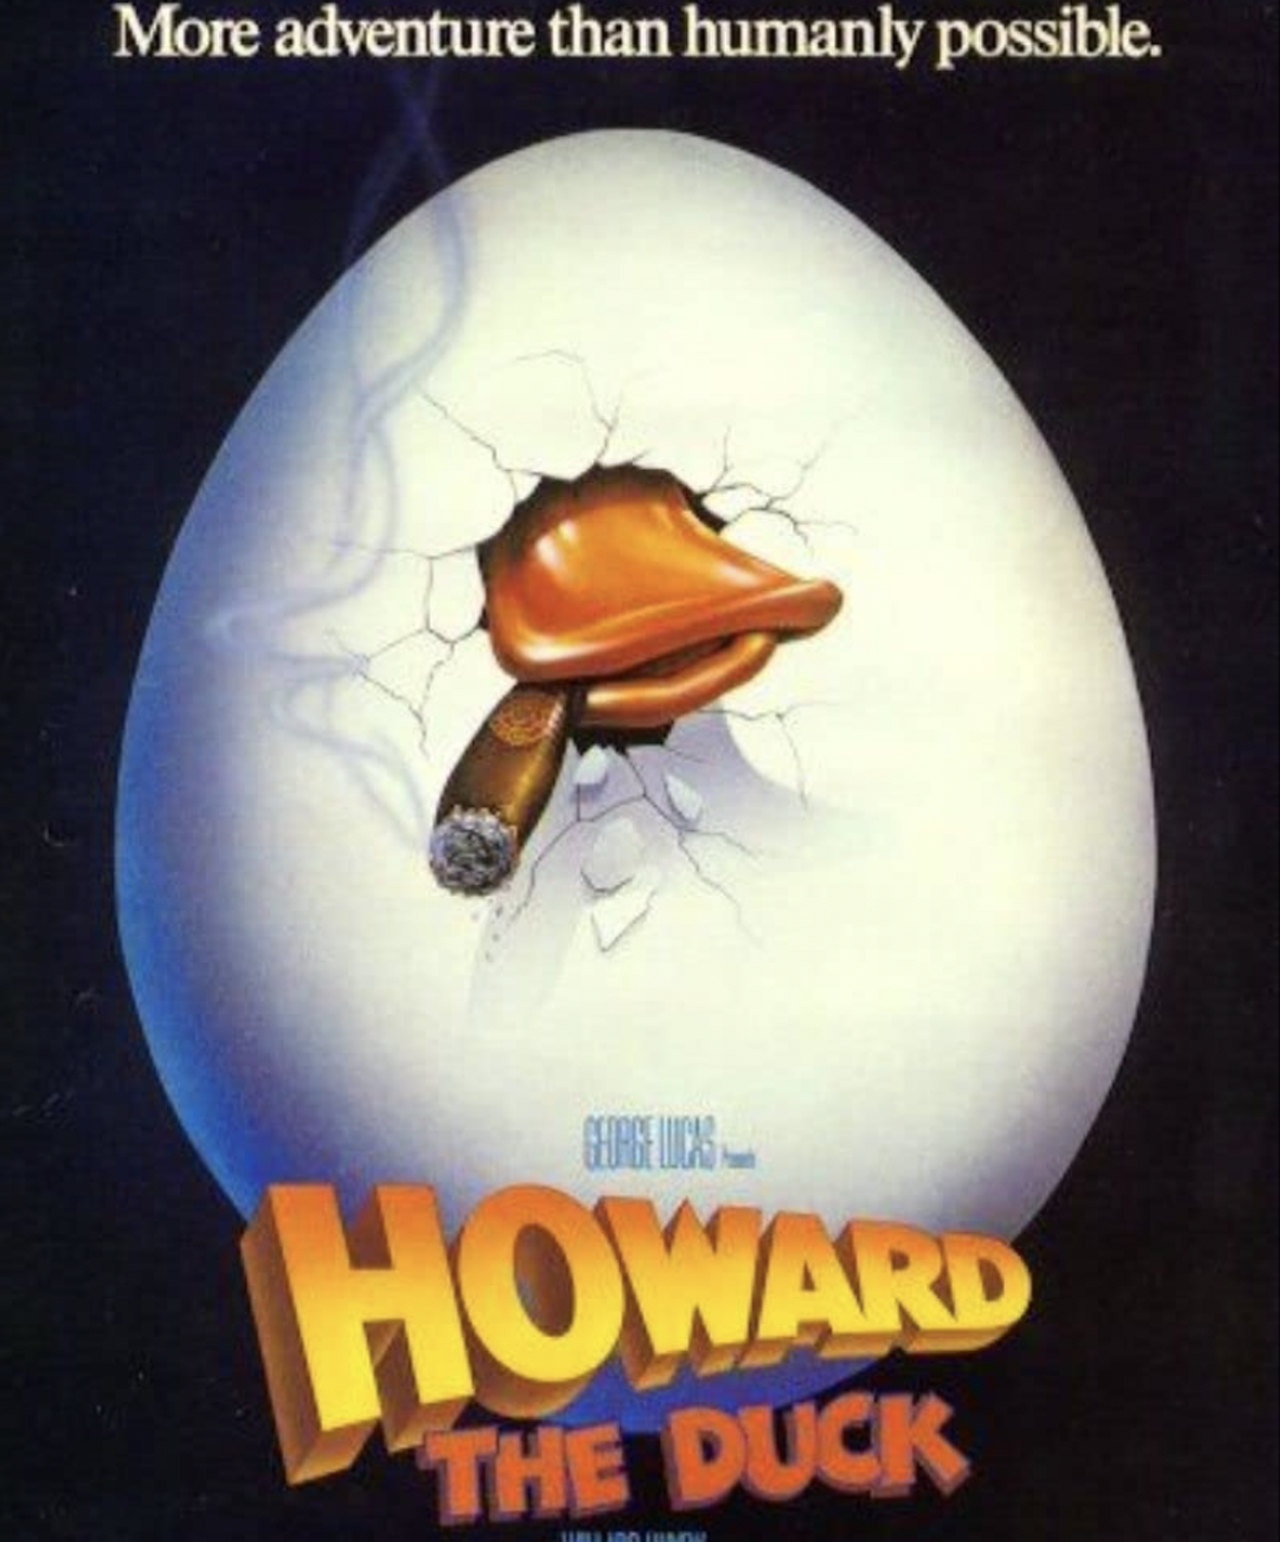   Howard the Duck  (1986) 
Yes, there’s a Marvel superhero movie about an alien duck-man who fights evil. Where is that alien duck-man sent? Cleveland, of course. The film is currently streaming on Amazon Prime.